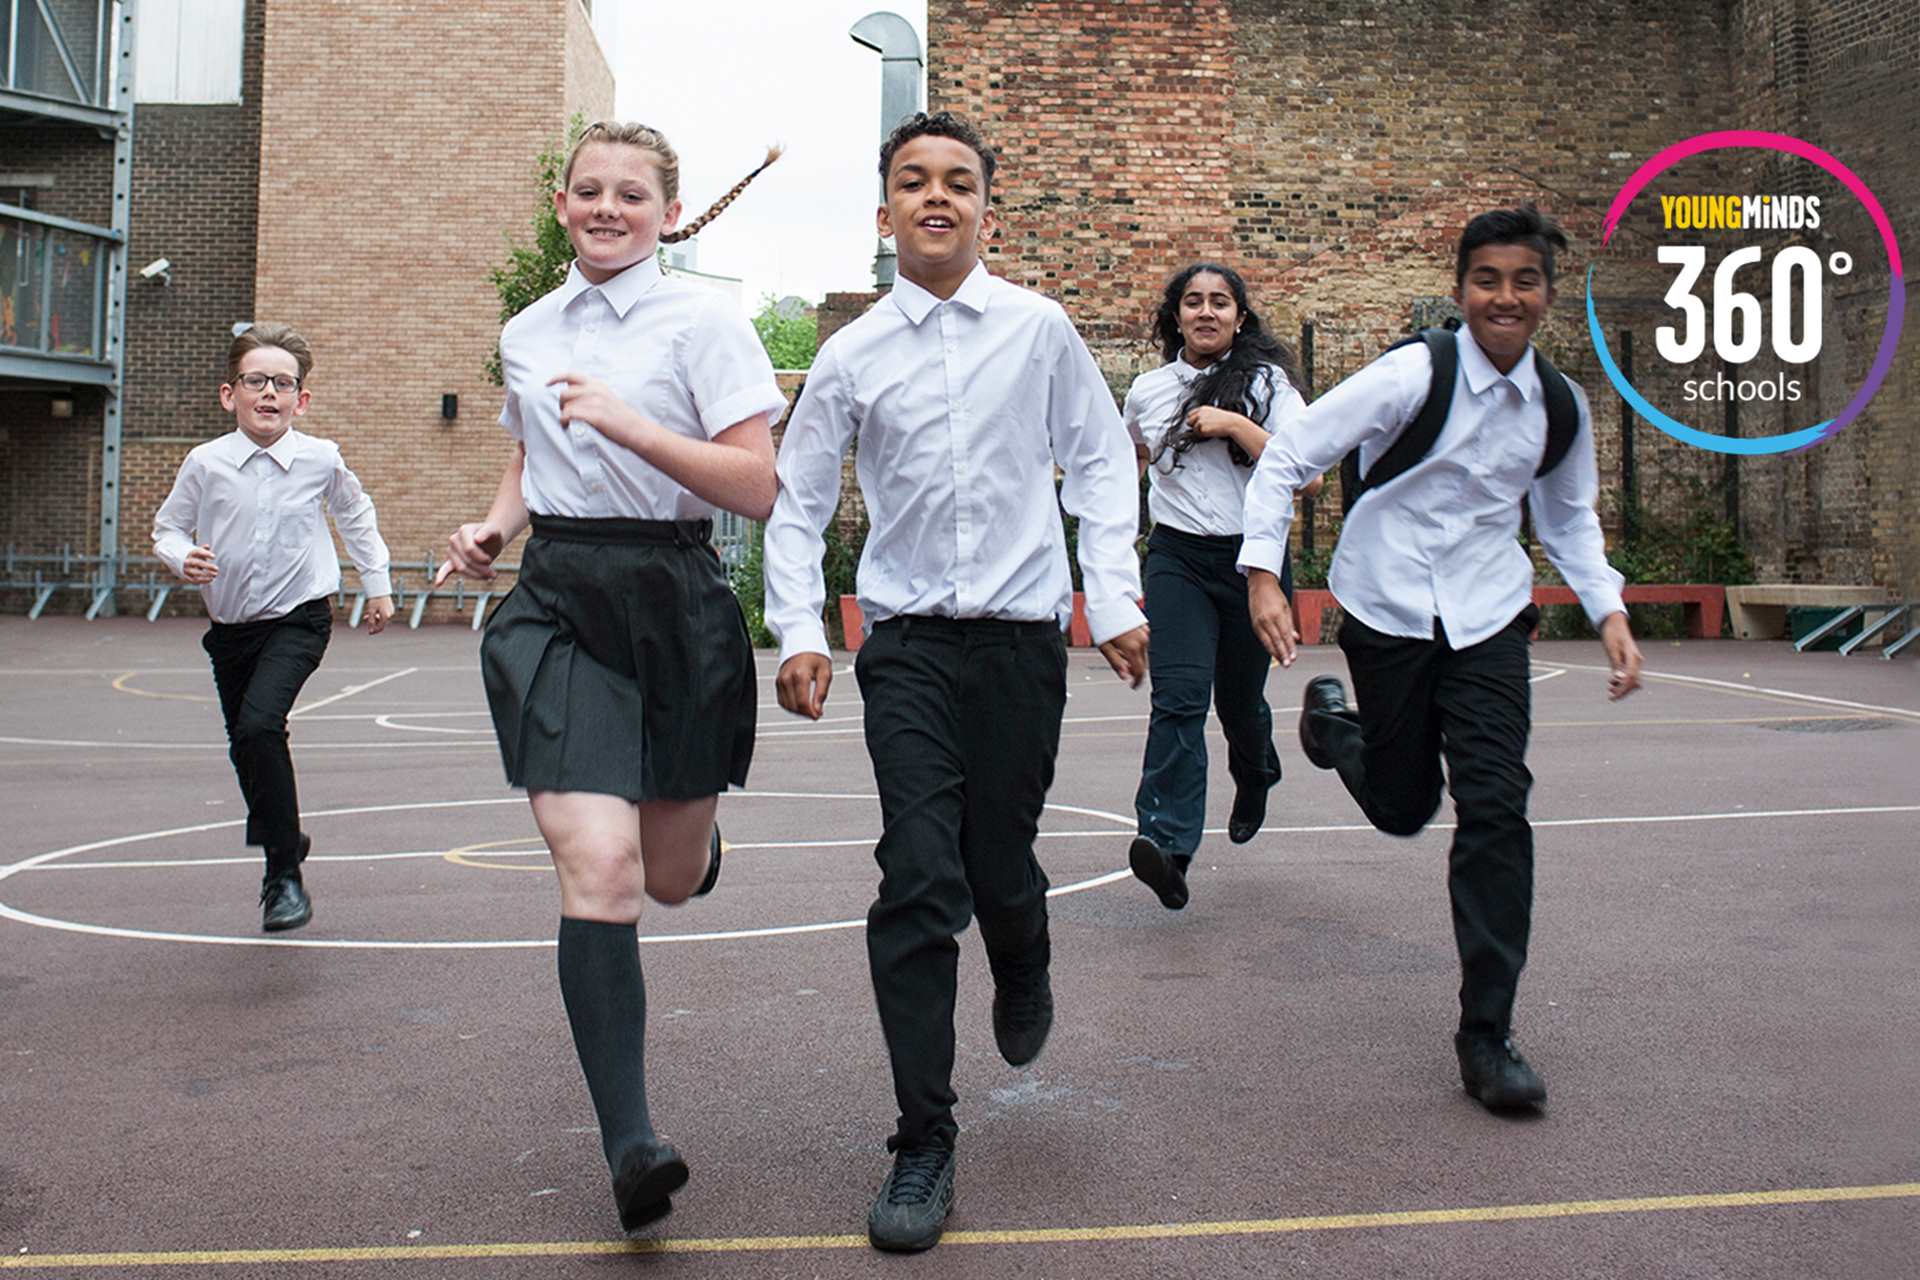 A group of pupils running in the playground with YoungMinds 360 logo